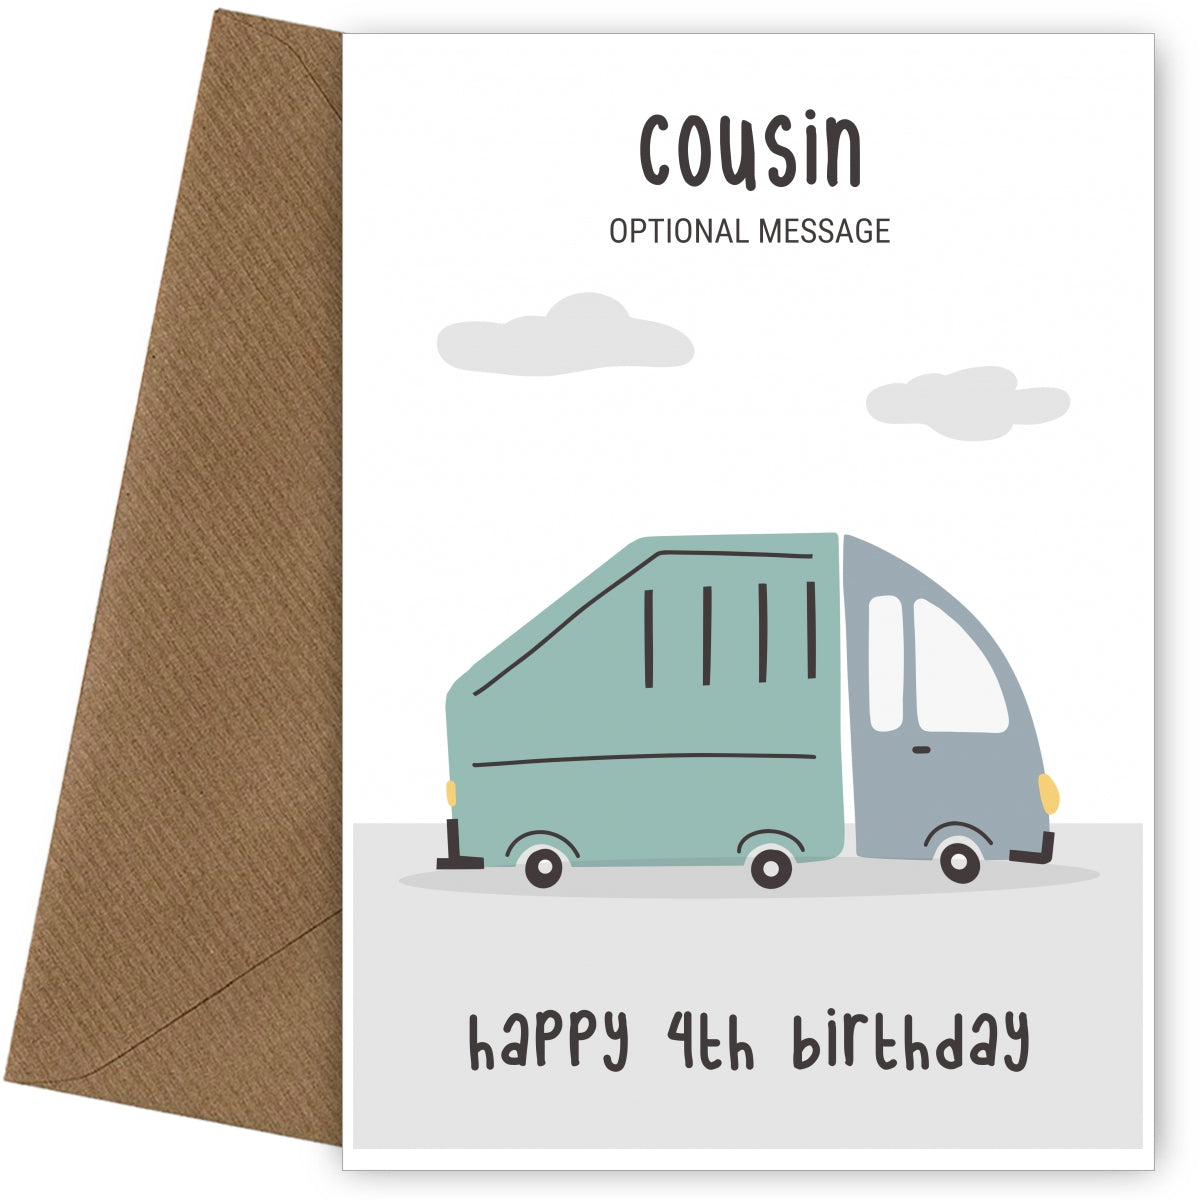 Fun Vehicles 4th Birthday Card for Cousin - Garbage Truck